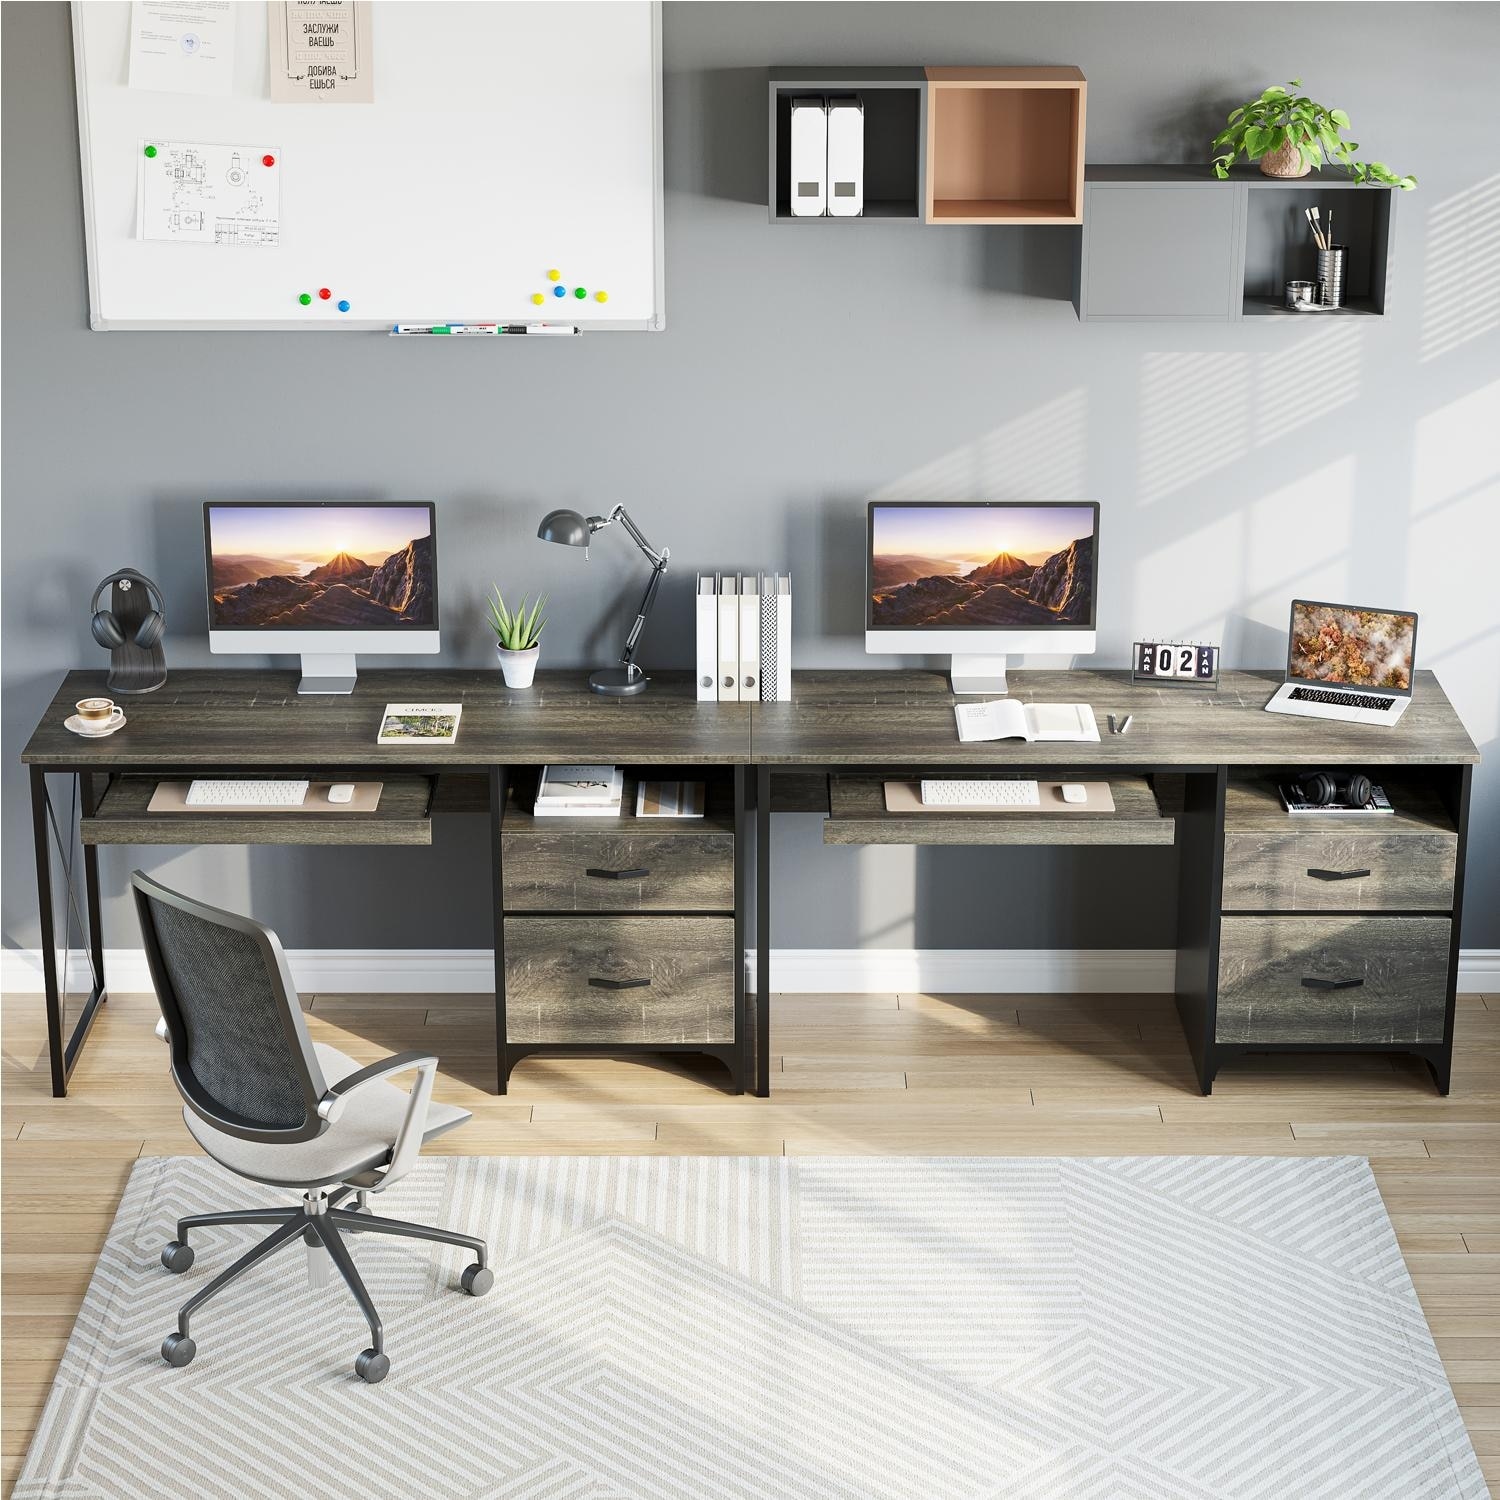 https://ak1.ostkcdn.com/images/products/is/images/direct/813ff344f03501de1eb2abac93887773caeda896/55-inch-Computer-Desk-with-Keyboard-Tray-and-Storage-Drawers.jpg